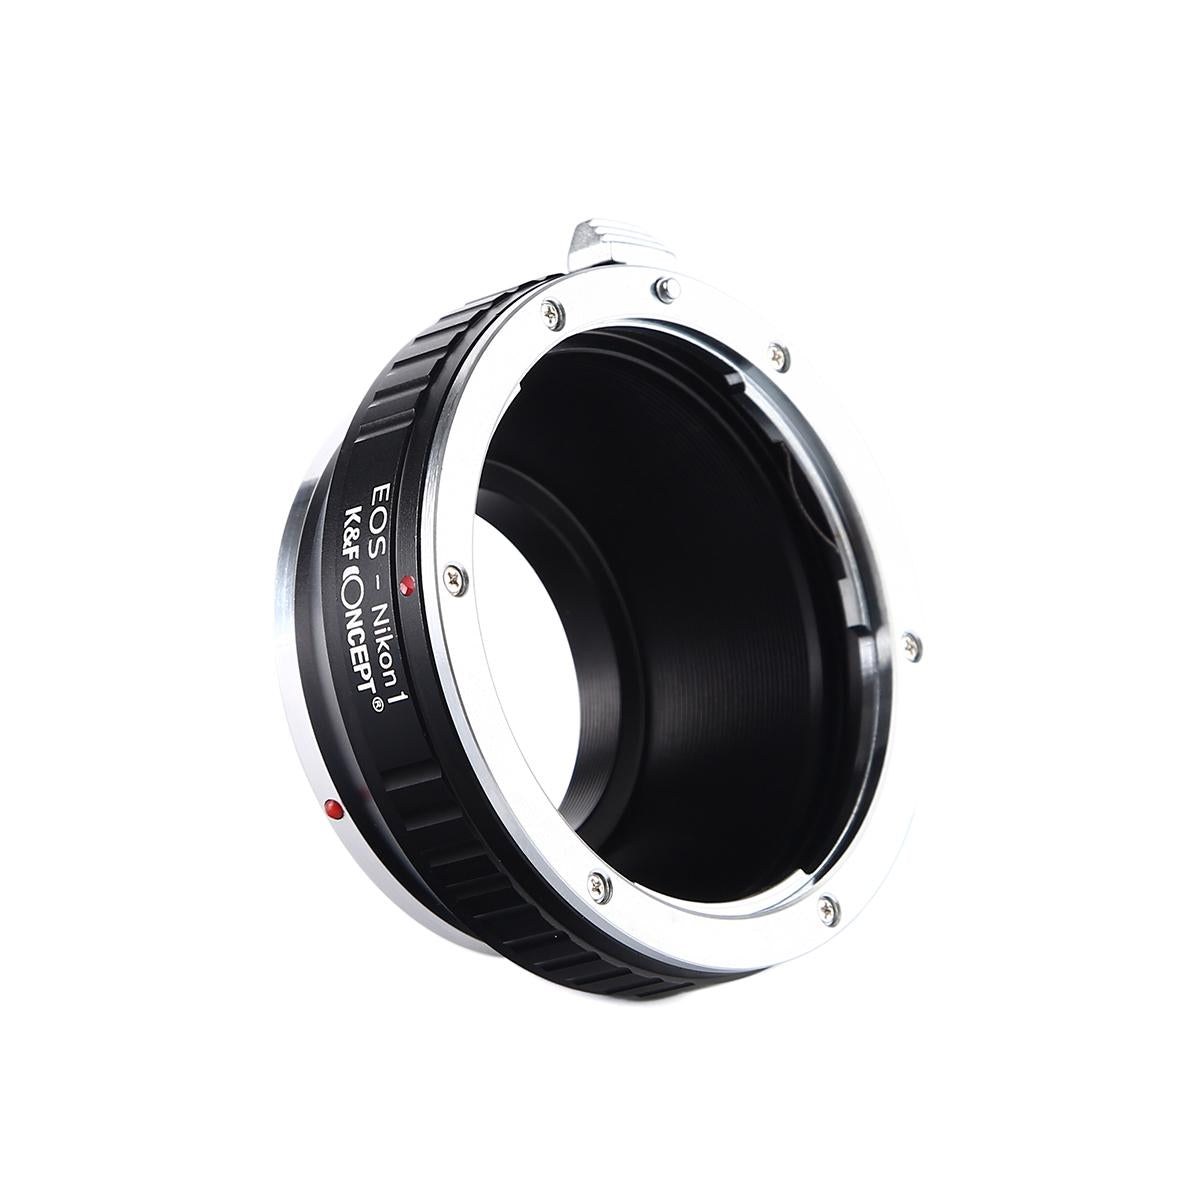 K&F Concept Lens Mount Adapter, Canon EOS EF Mount Lens to Nikon 1-Series Camera, fits Nikon V1, J1 Mirrorless Cameras, fits EOS EF, and EF-S Lenses